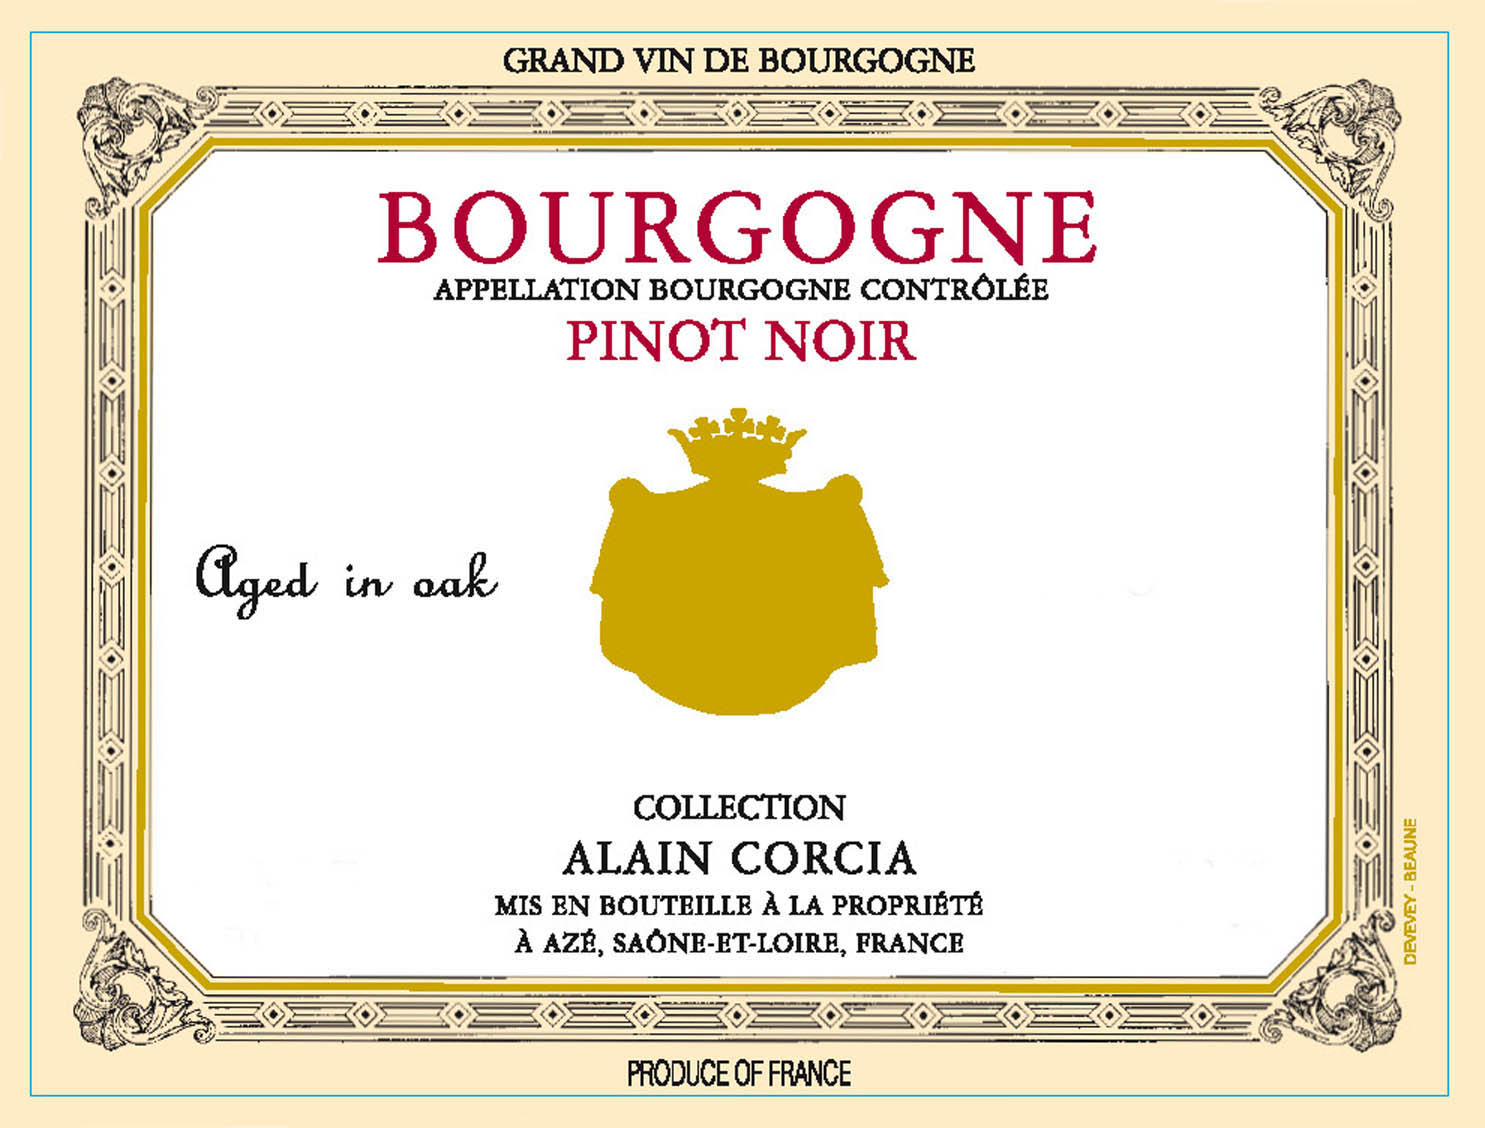 Collection Alain Corcia - Bourgogne - Pinot Noir label